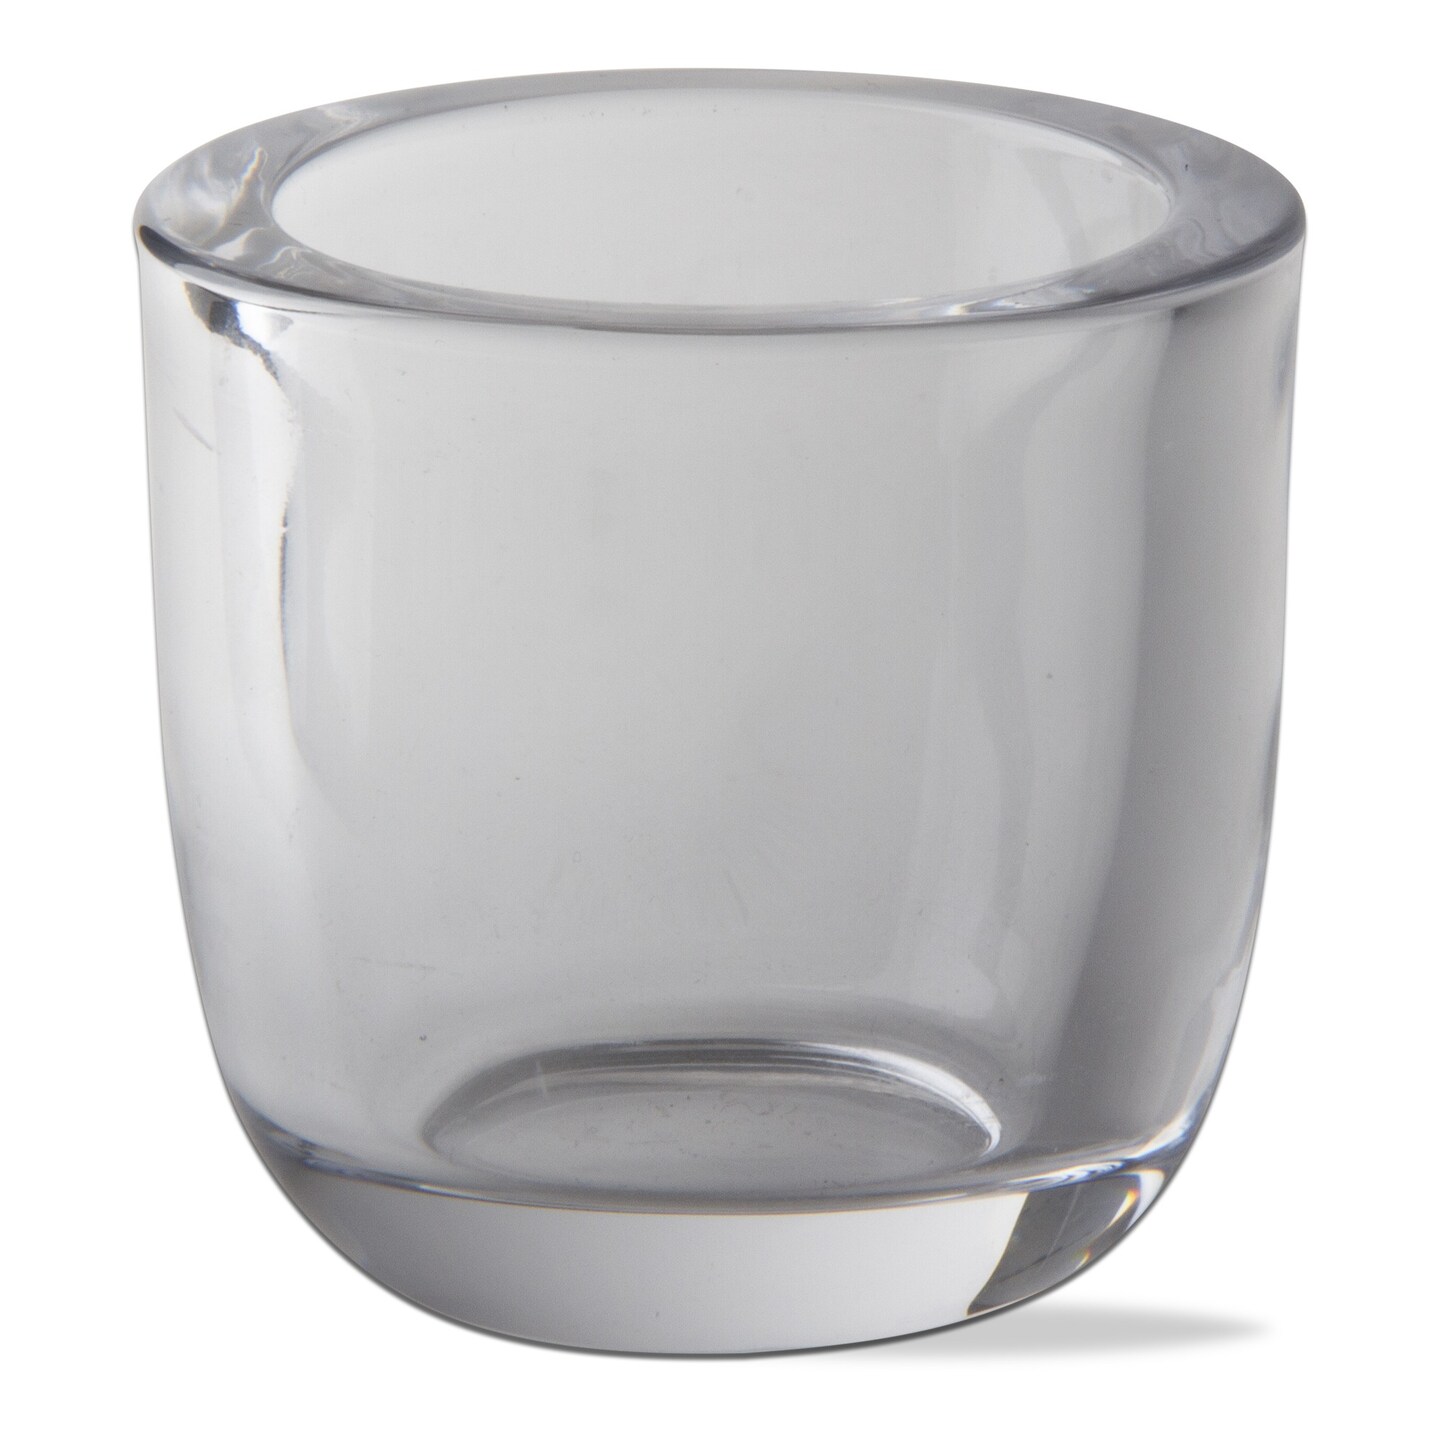 Classic Tealight Holder Clear Glass Candle Holder, 3.14L x 3.14W x 3.07H inches